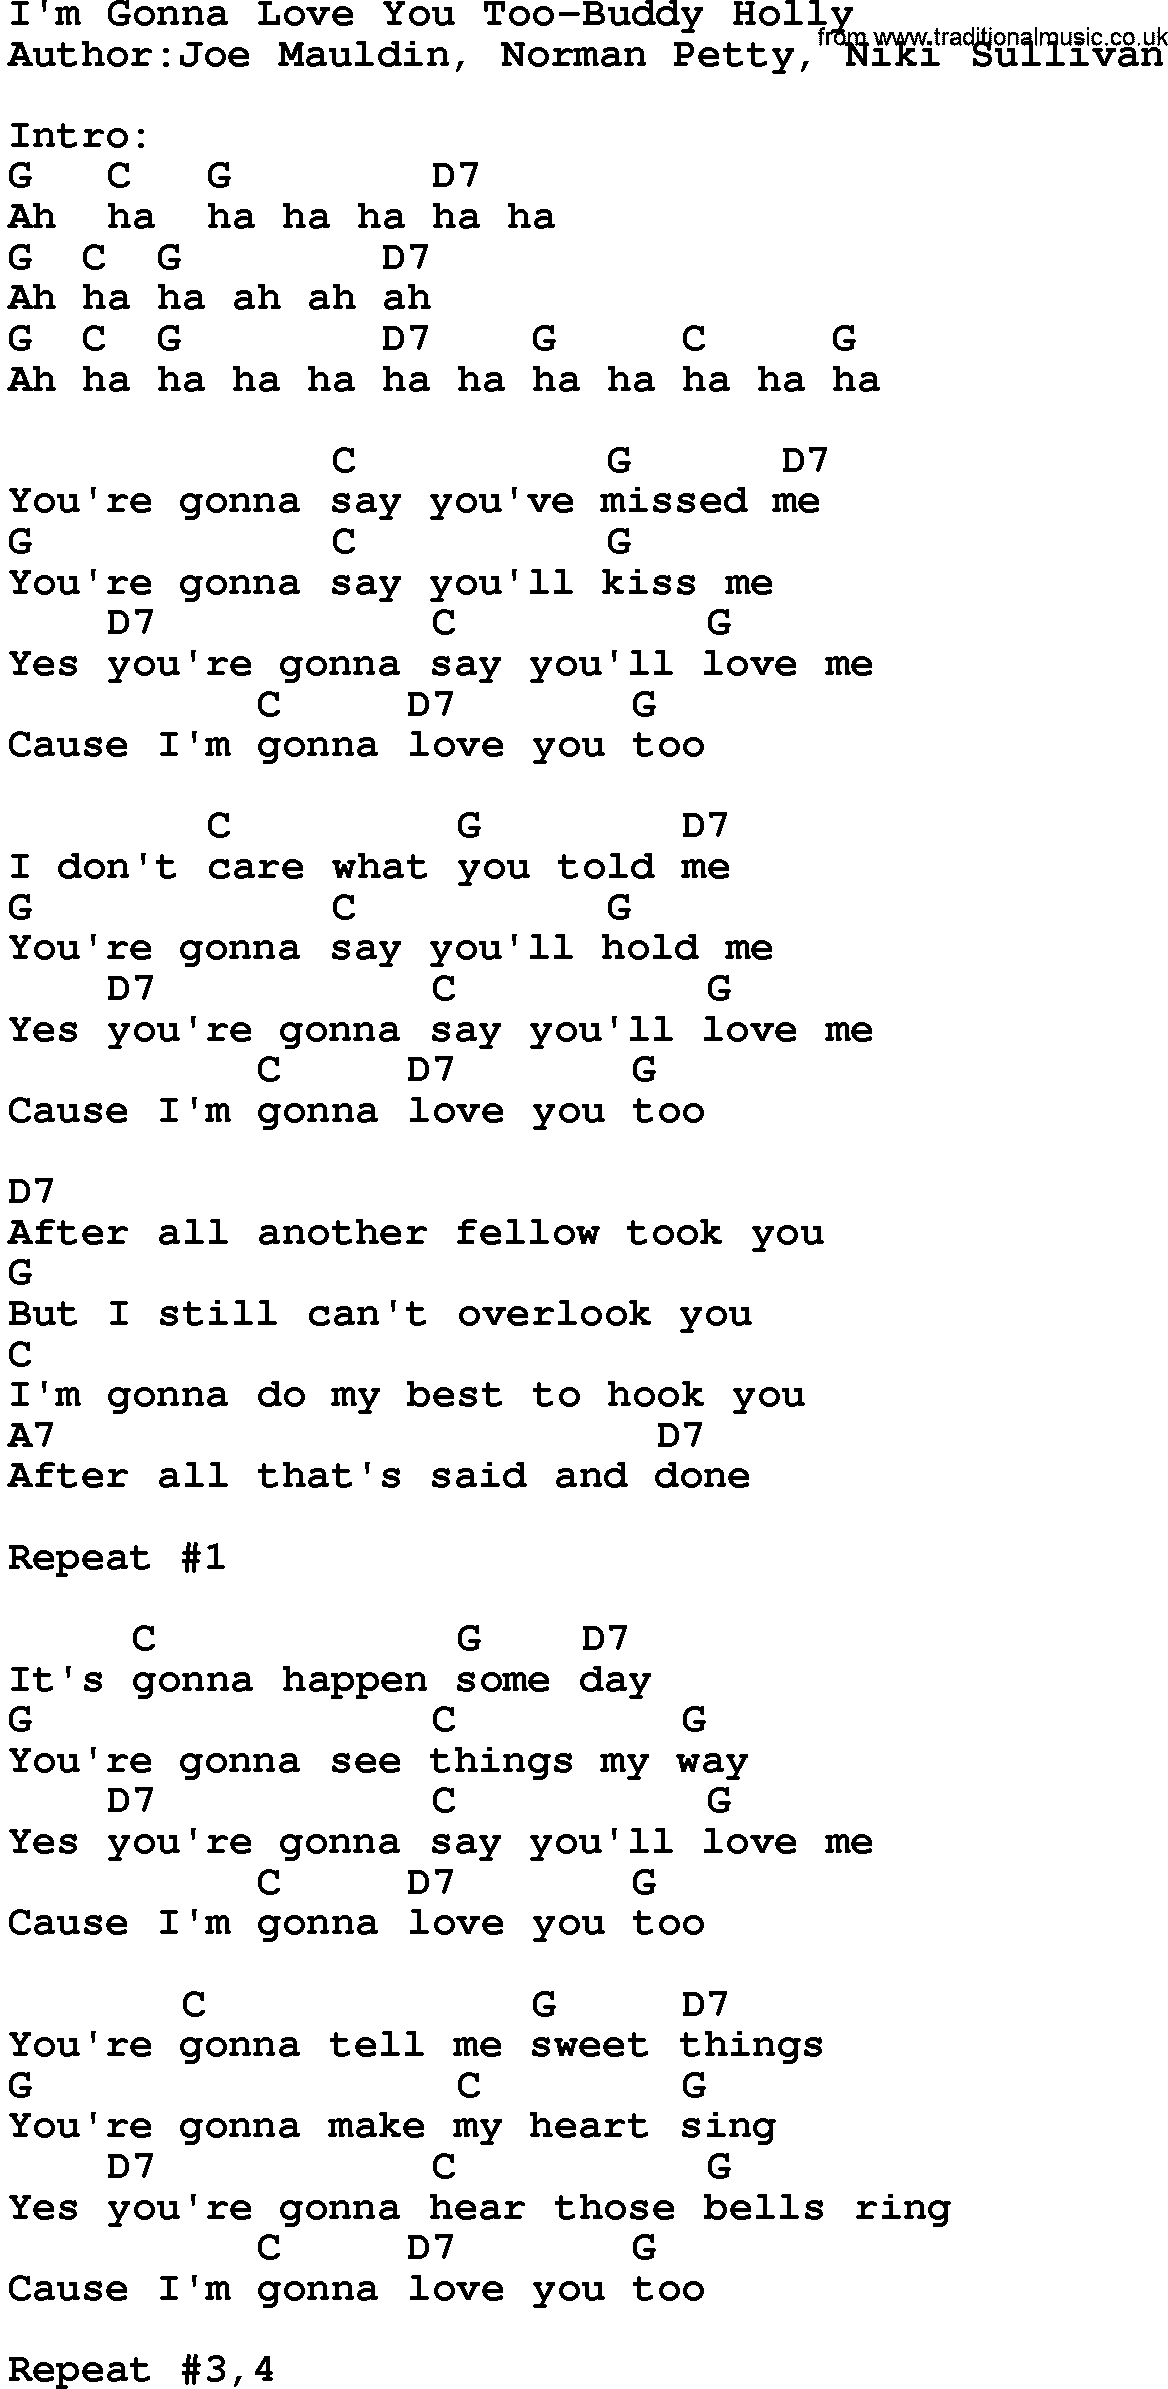 Country music song: I'm Gonna Love You Too-Buddy Holly lyrics and chords